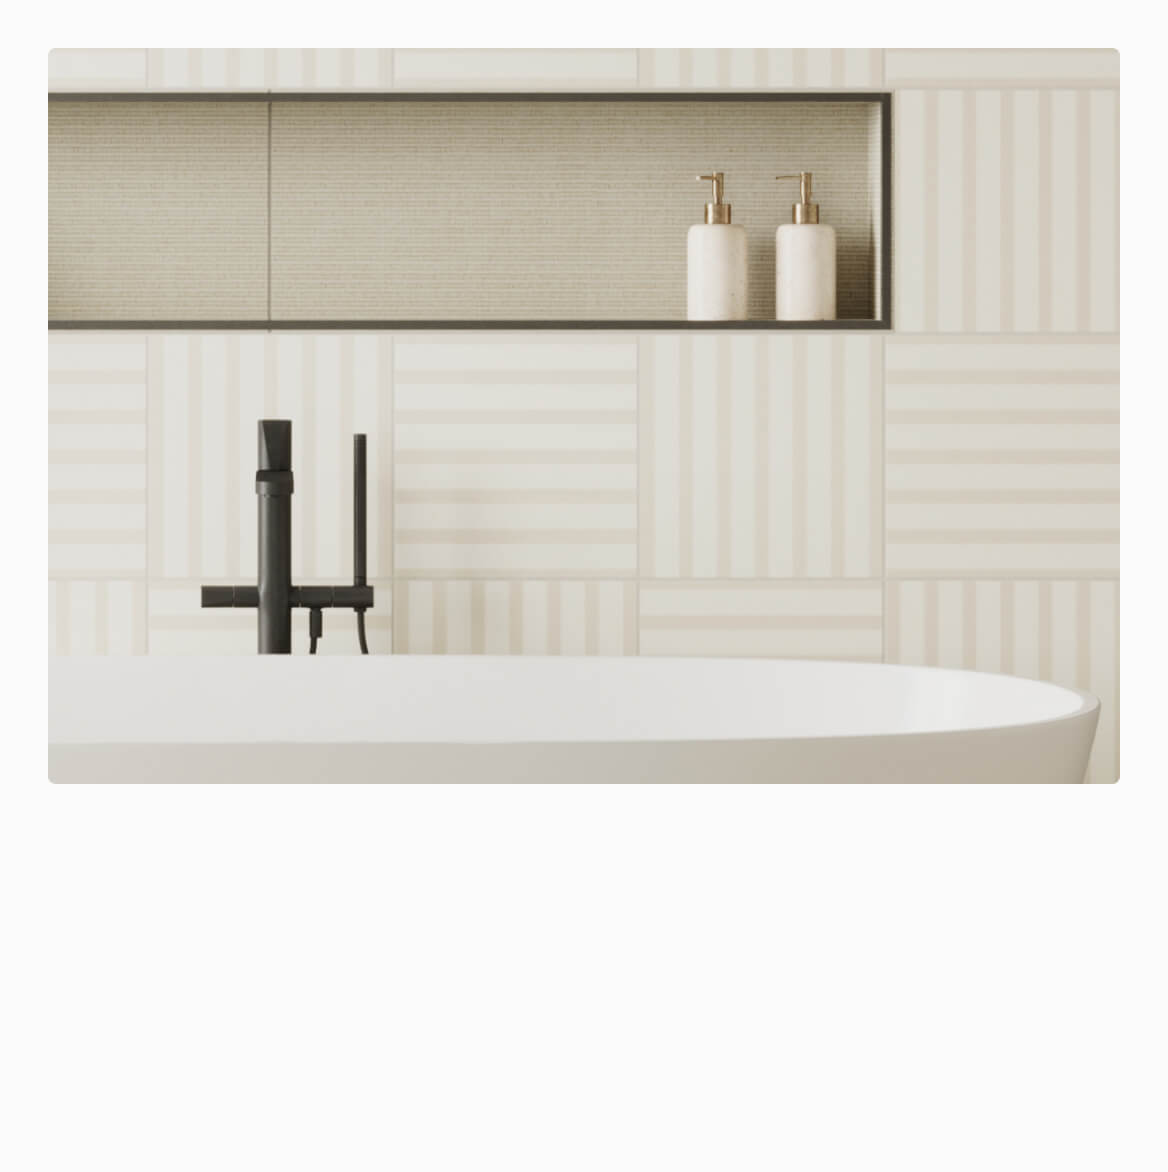 Minimalist bathroom featuring soft beige striped tiles with a sleek, modern faucet and elegant soap dispensers on a clean white countertop